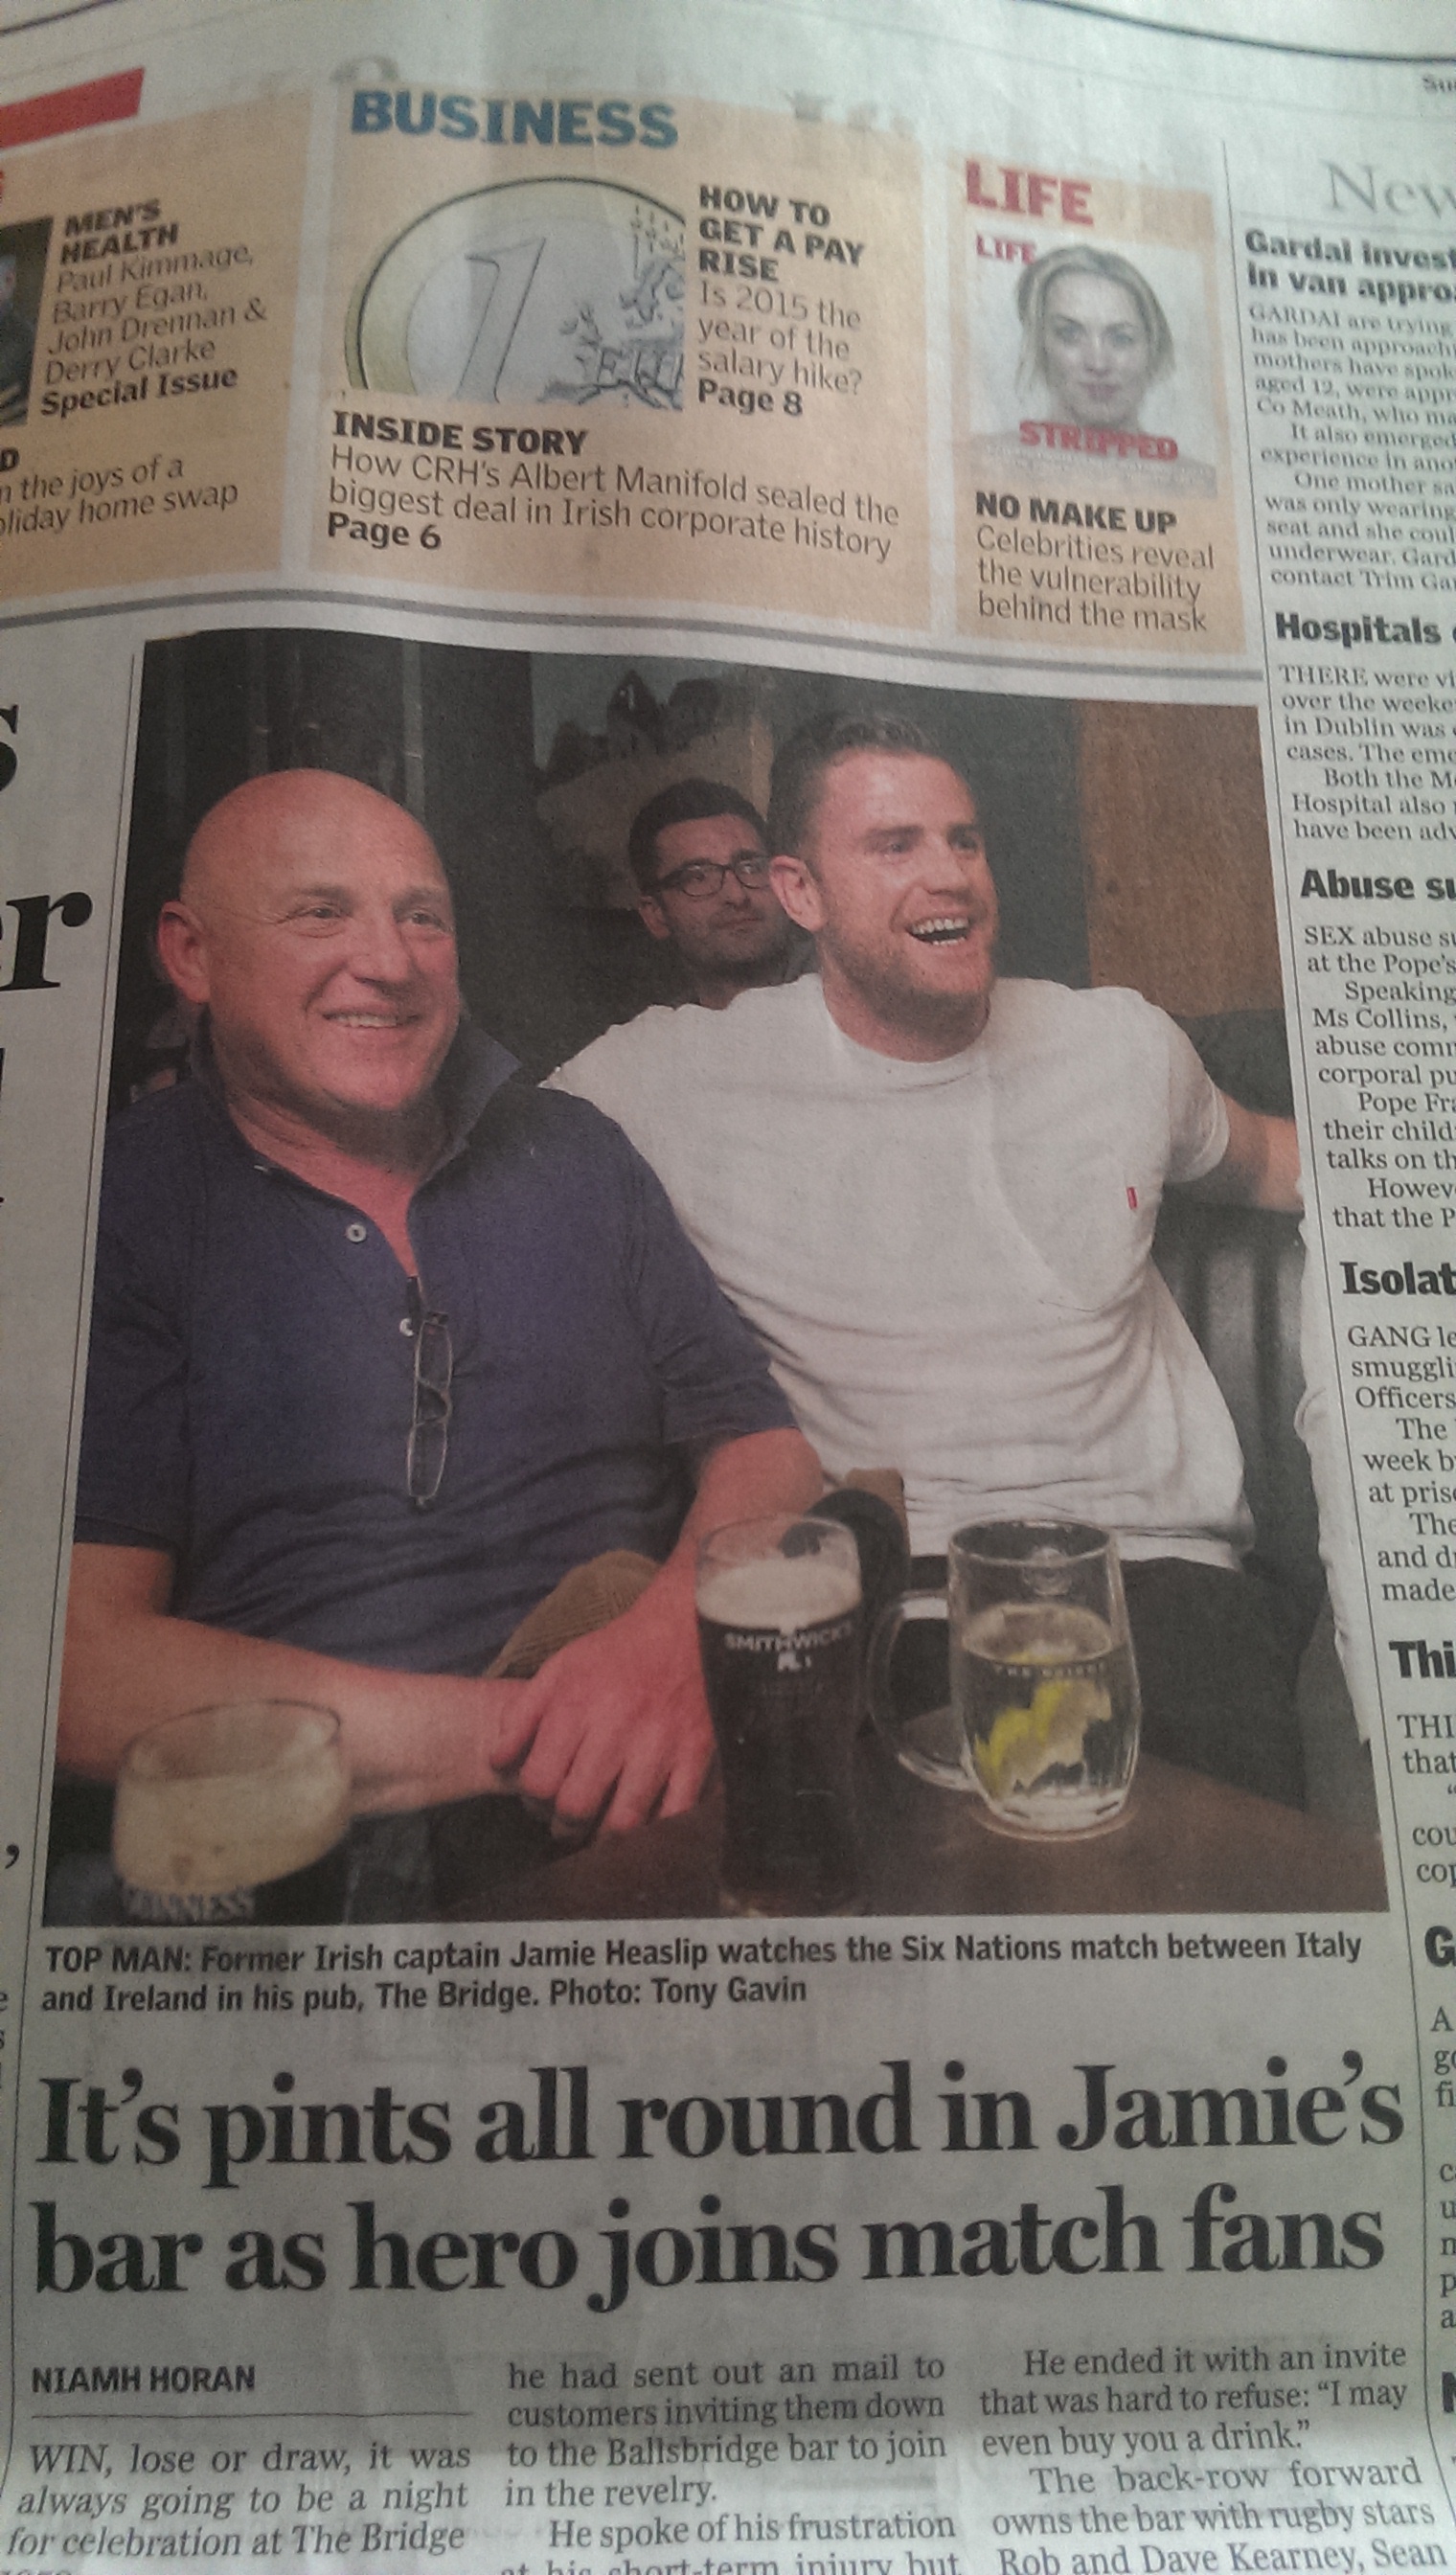 Richard and Jamie Heaslip in the paper, 8th February, 2015. Source: Irish Independent